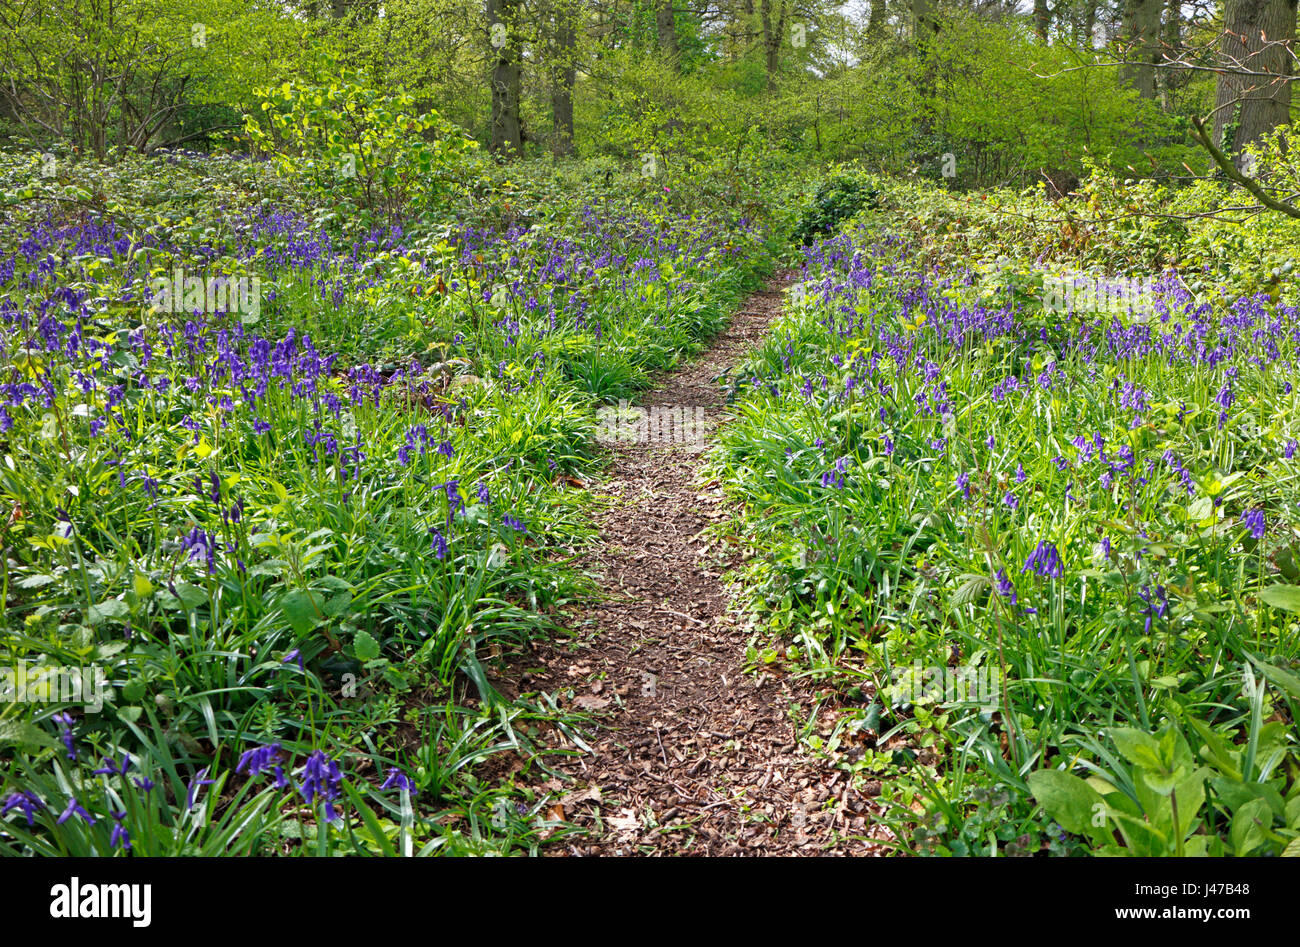 A woodland path through bluebells in spring in the Great Wood at Blickling, Norfolk, England, United Kingdom. Stock Photo